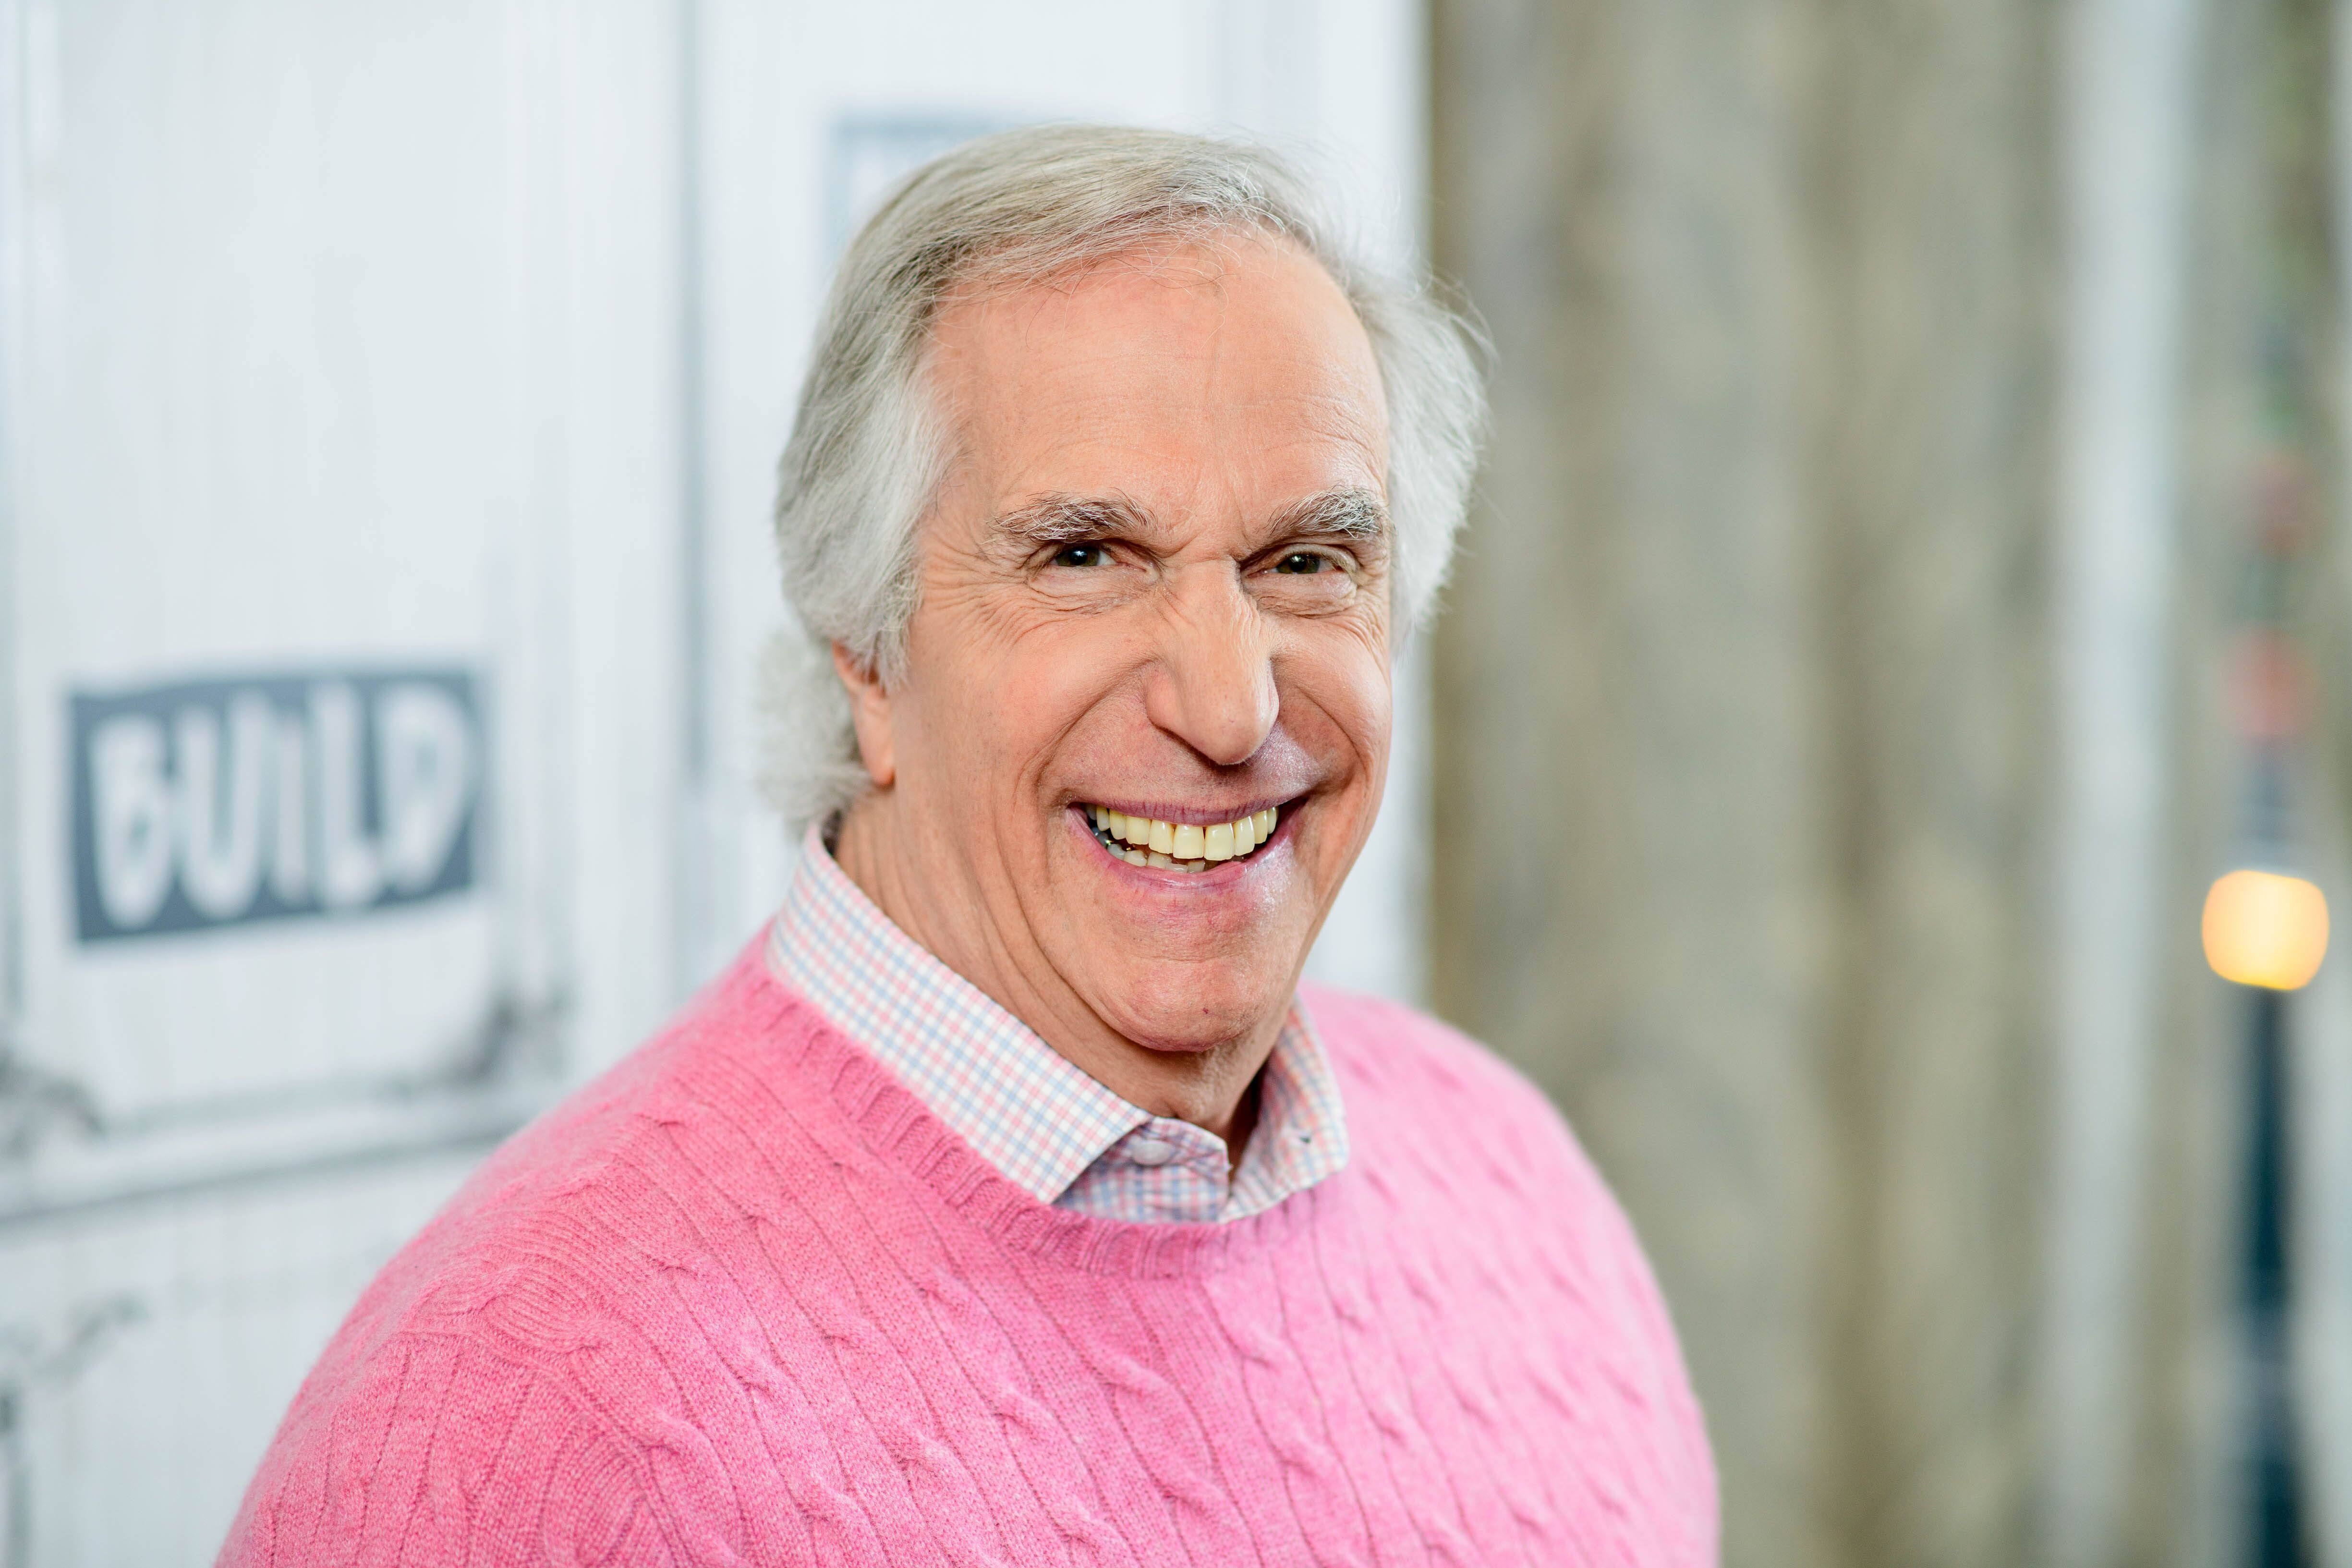 Henry Winkler discusses "Barry" with the Build Series at Build Studio in New York City | Photo: Getty Images